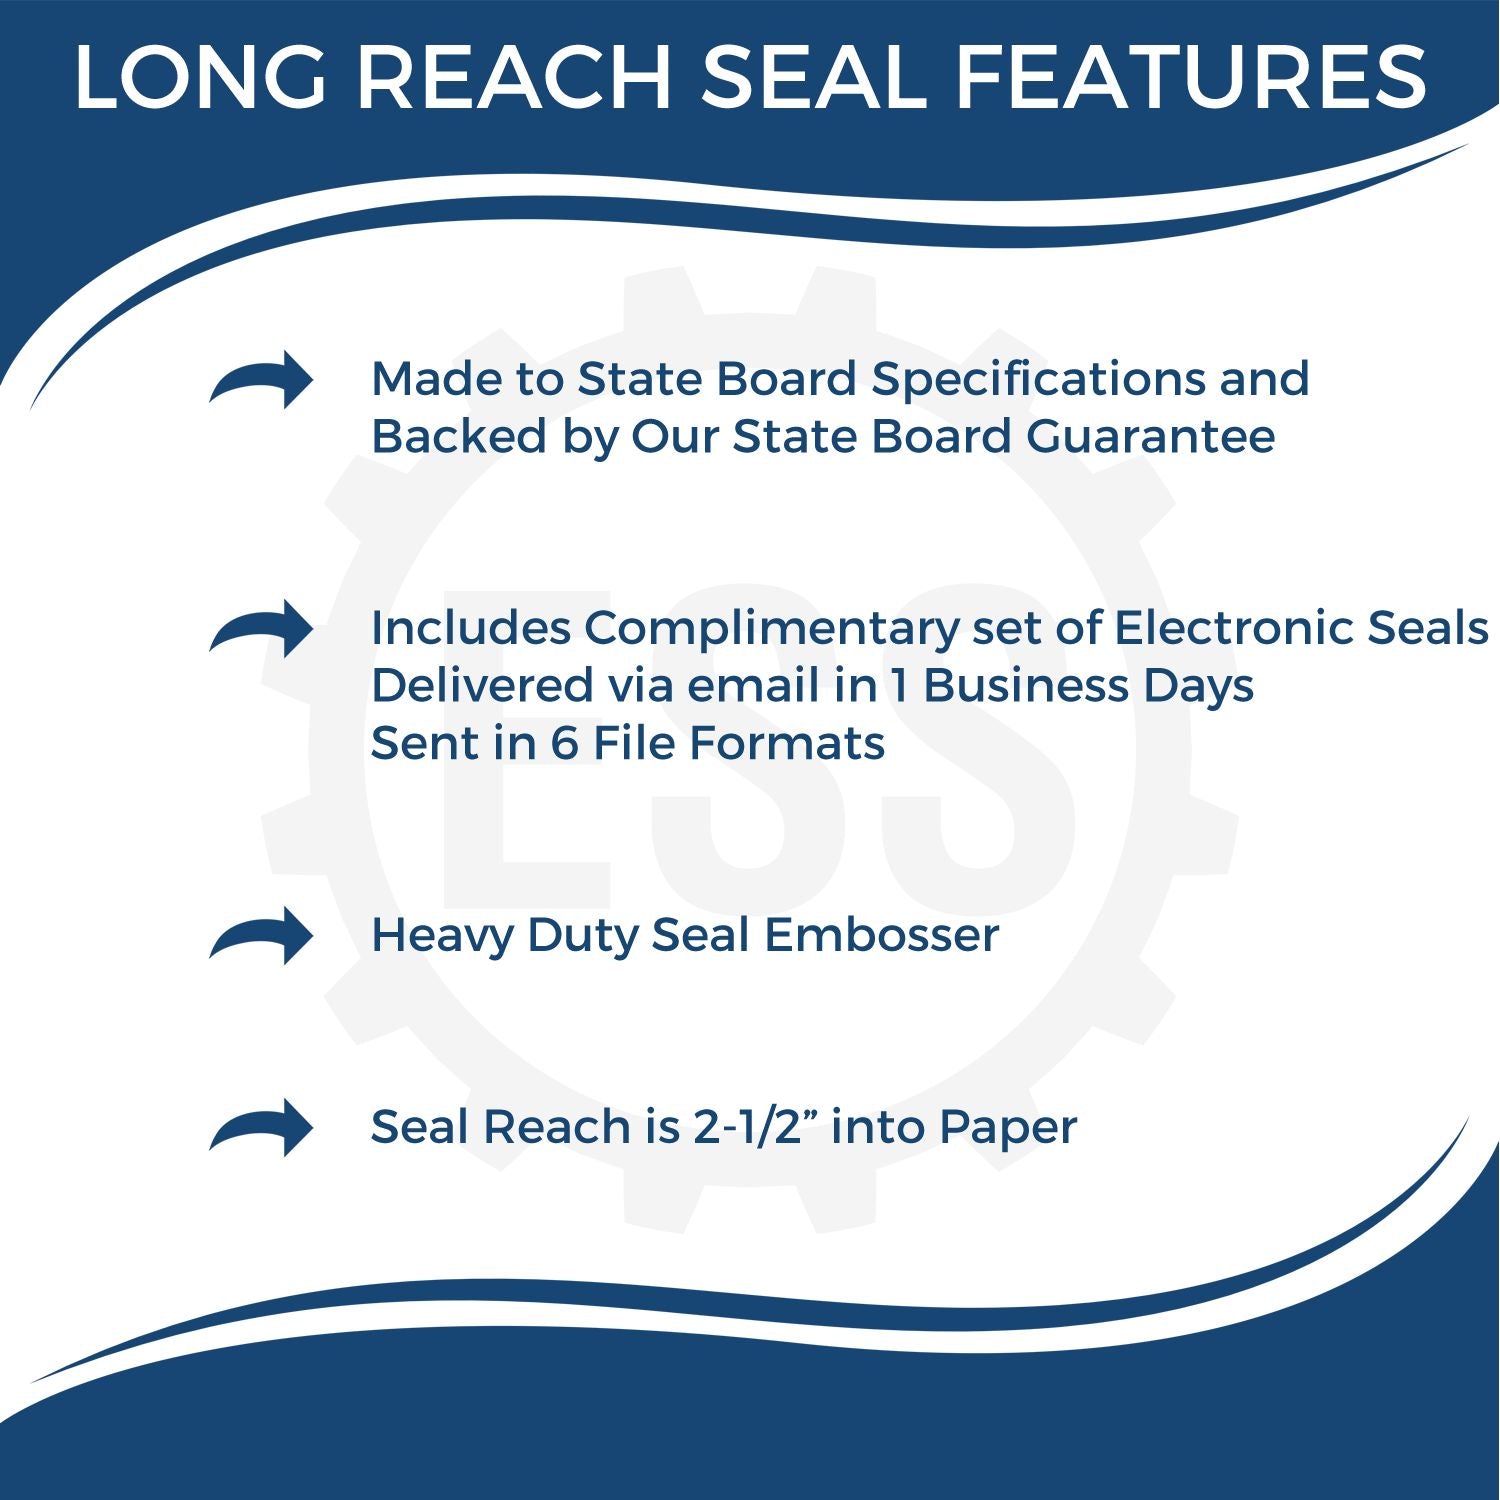 The main image for the Long Reach Michigan PE Seal depicting a sample of the imprint and electronic files